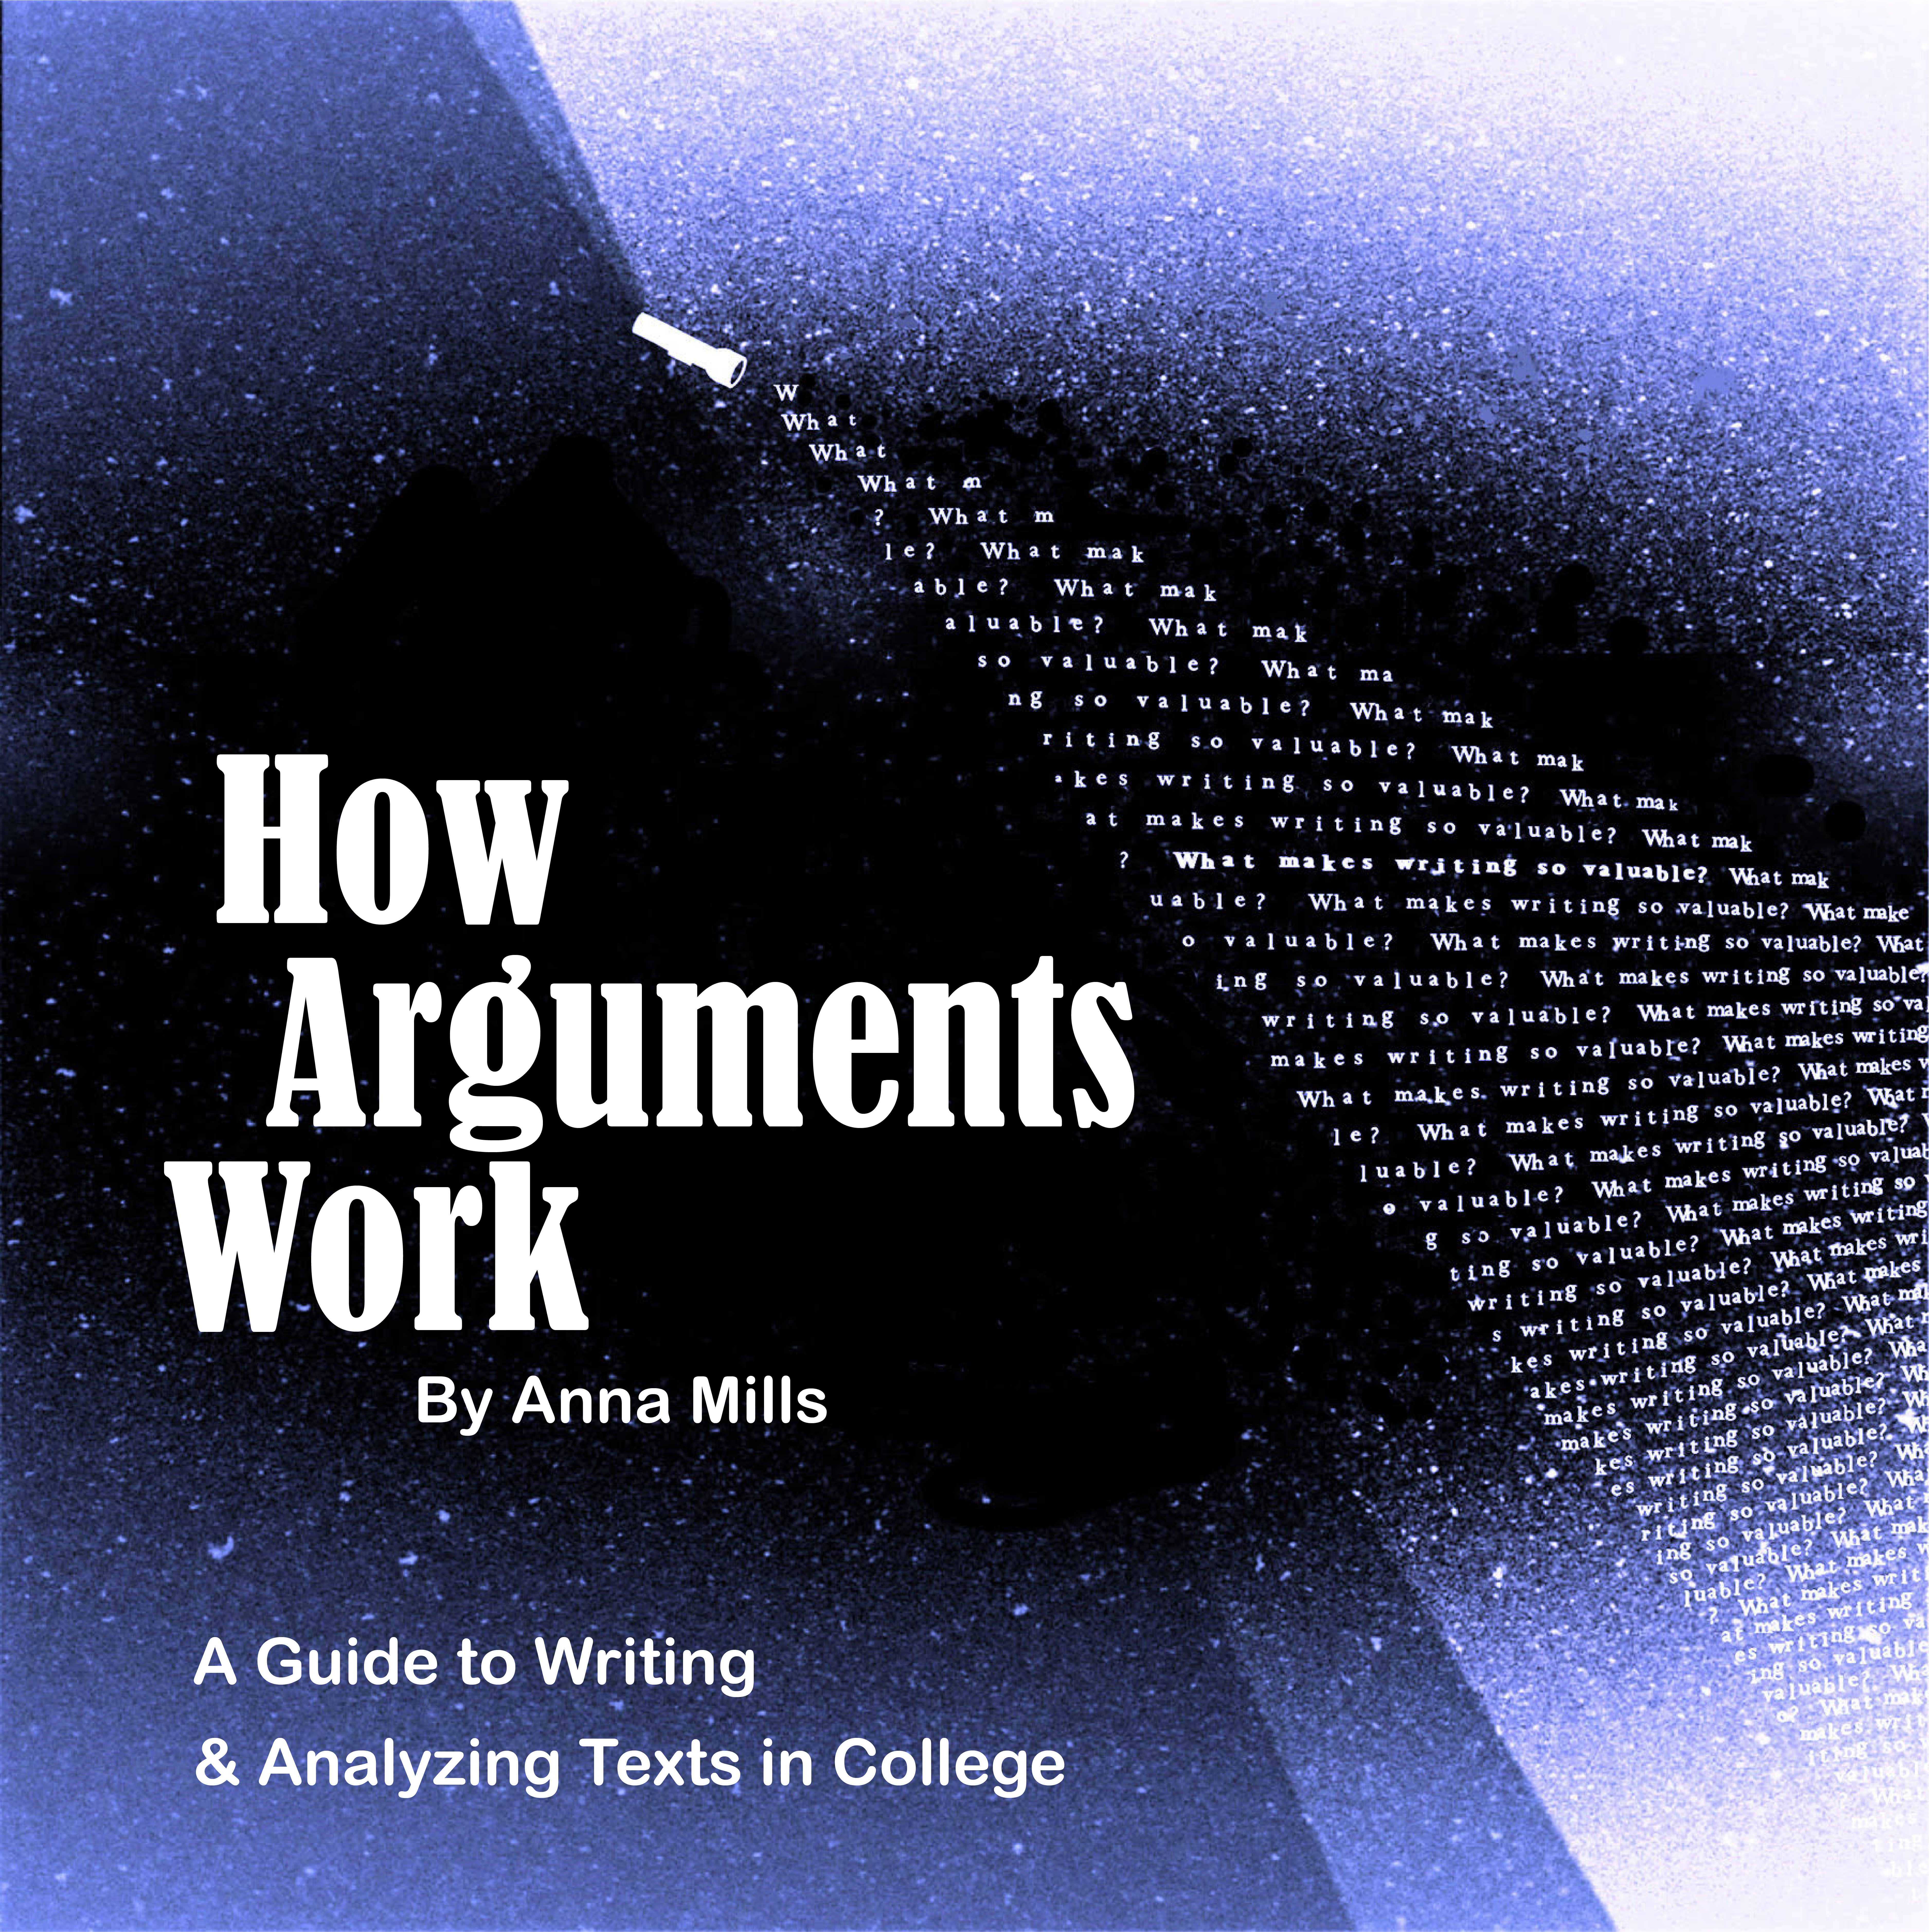 The title "How Arguments Work: A Guide to Writing and Analyzing Texts in College by Anna Mills" against a dark background with a flashlight illuminating words and questions